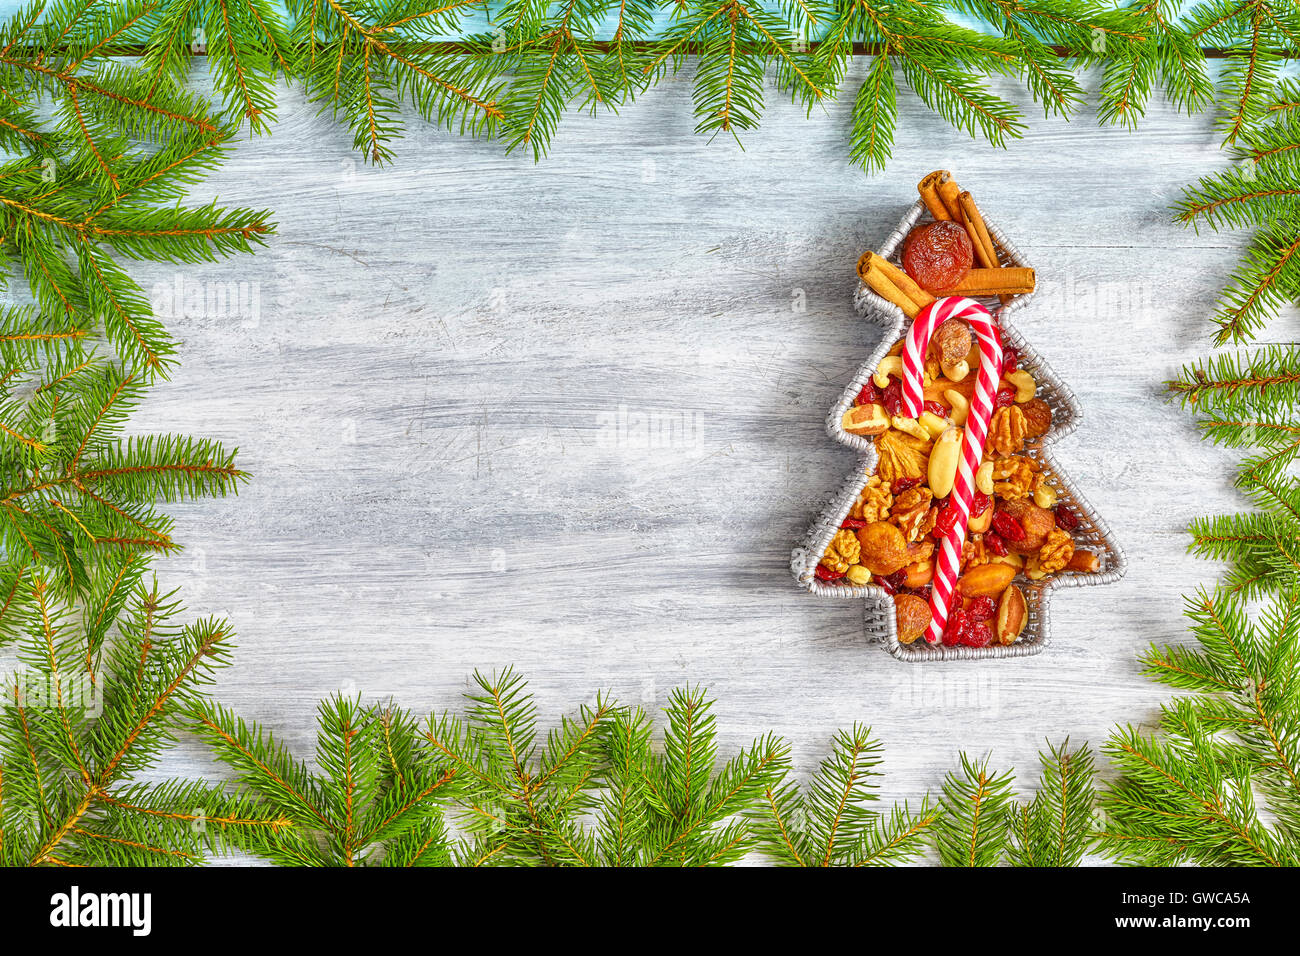 Christmas tree shaped container filled with nuts and dried fruits on a rustic wooden table, top view with copy space. Stock Photo